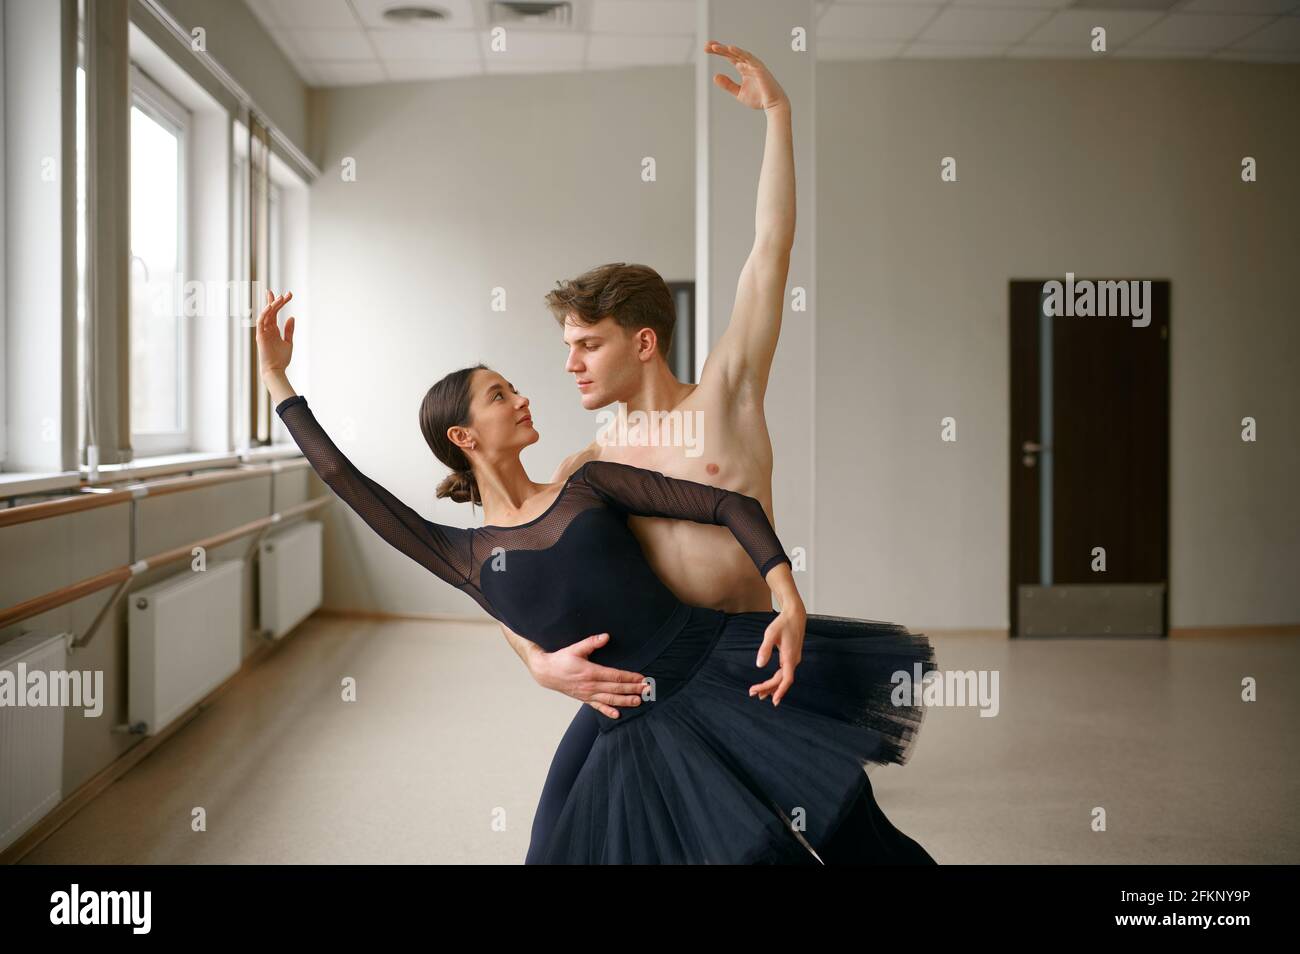 Female and male ballet dancers dancing at barre Stock Photo